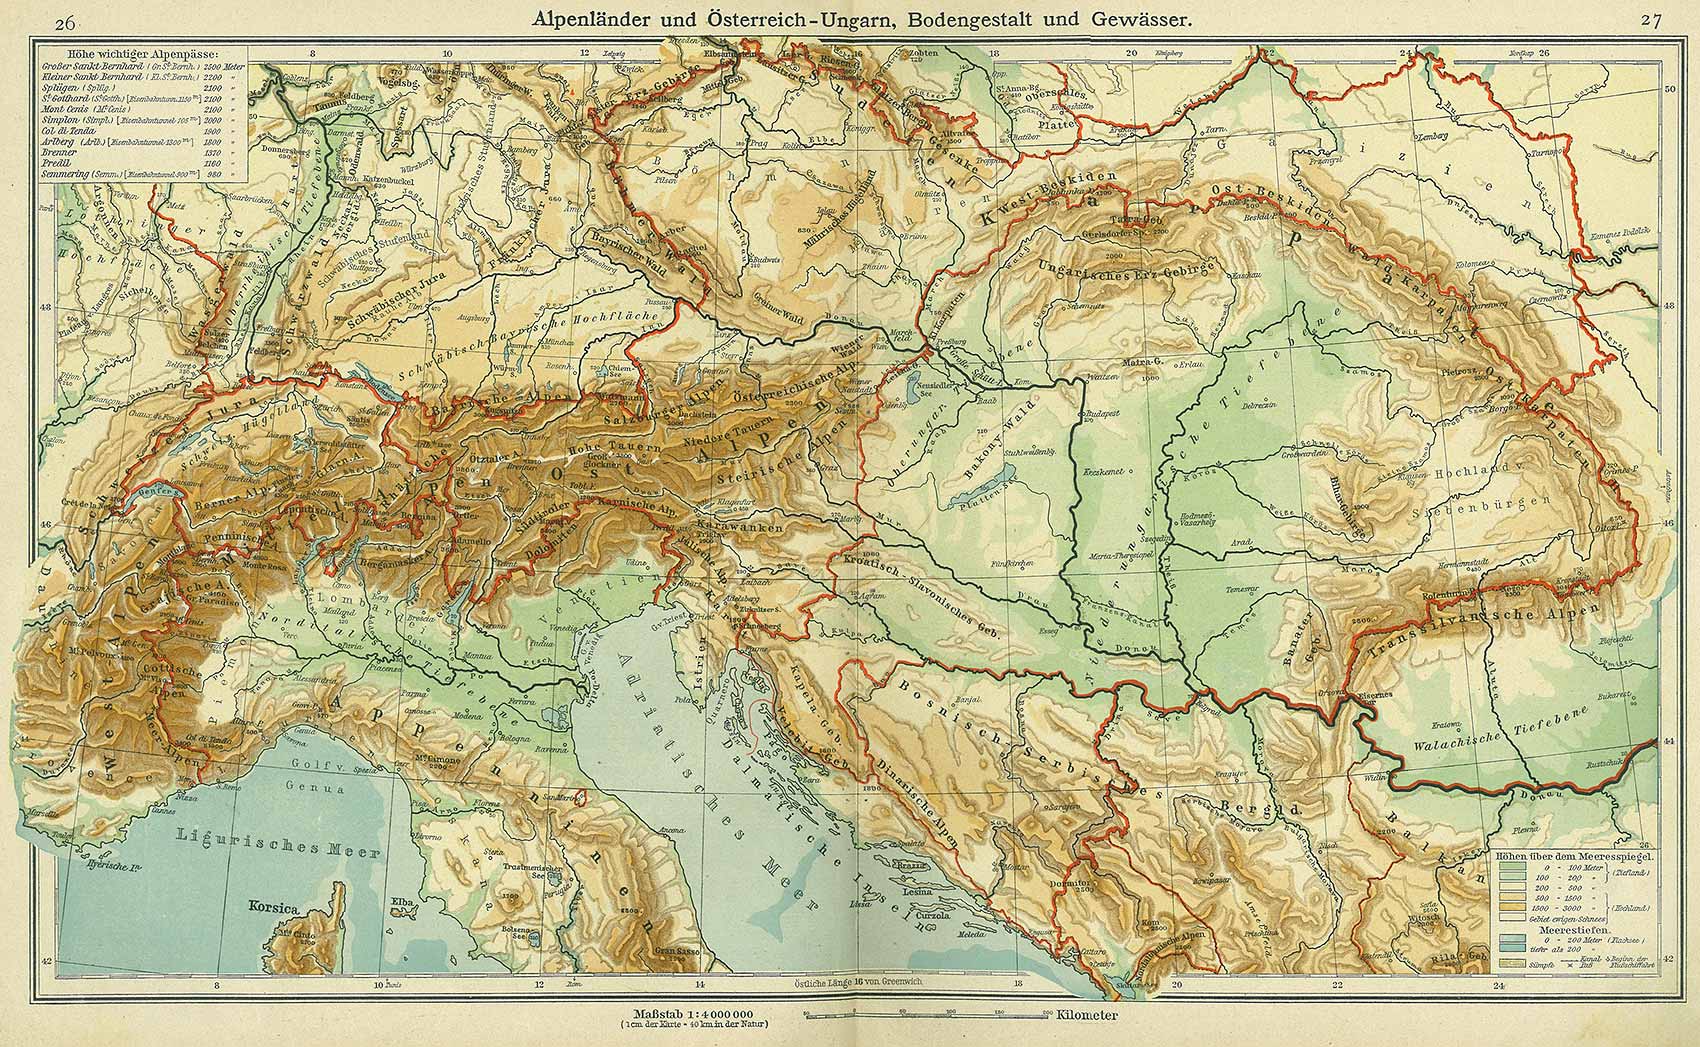 Austria-Hungarian Alps, topography and water areas, Andrees 'Berliner Schul-Atlas', 1916, pages 26 to 27, published size to print borders 43.46 cm wide by 26.45 cm high.